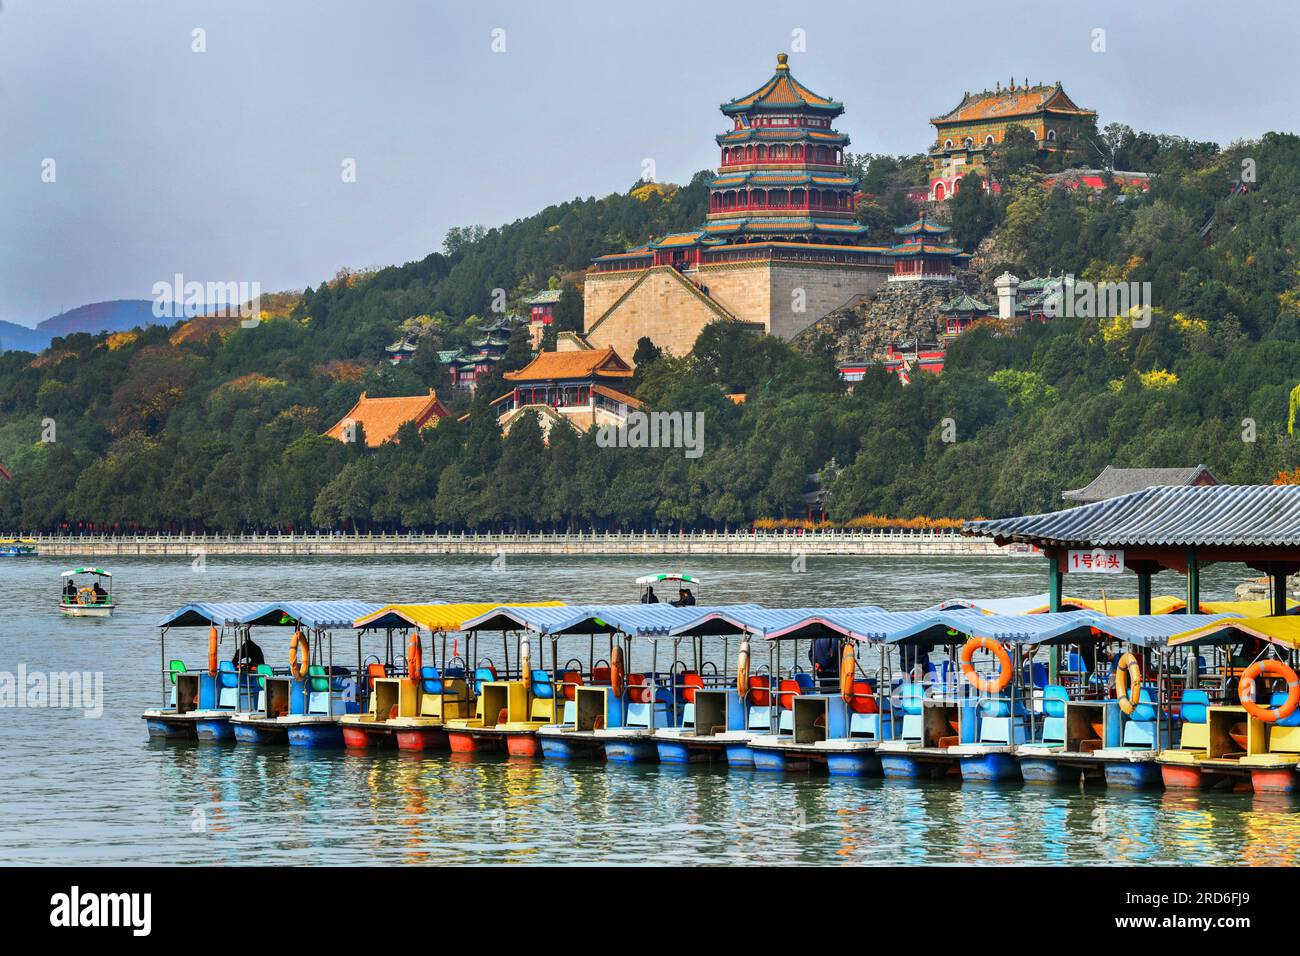 The Imperial Summer palace in Beijing, china Stock Photo